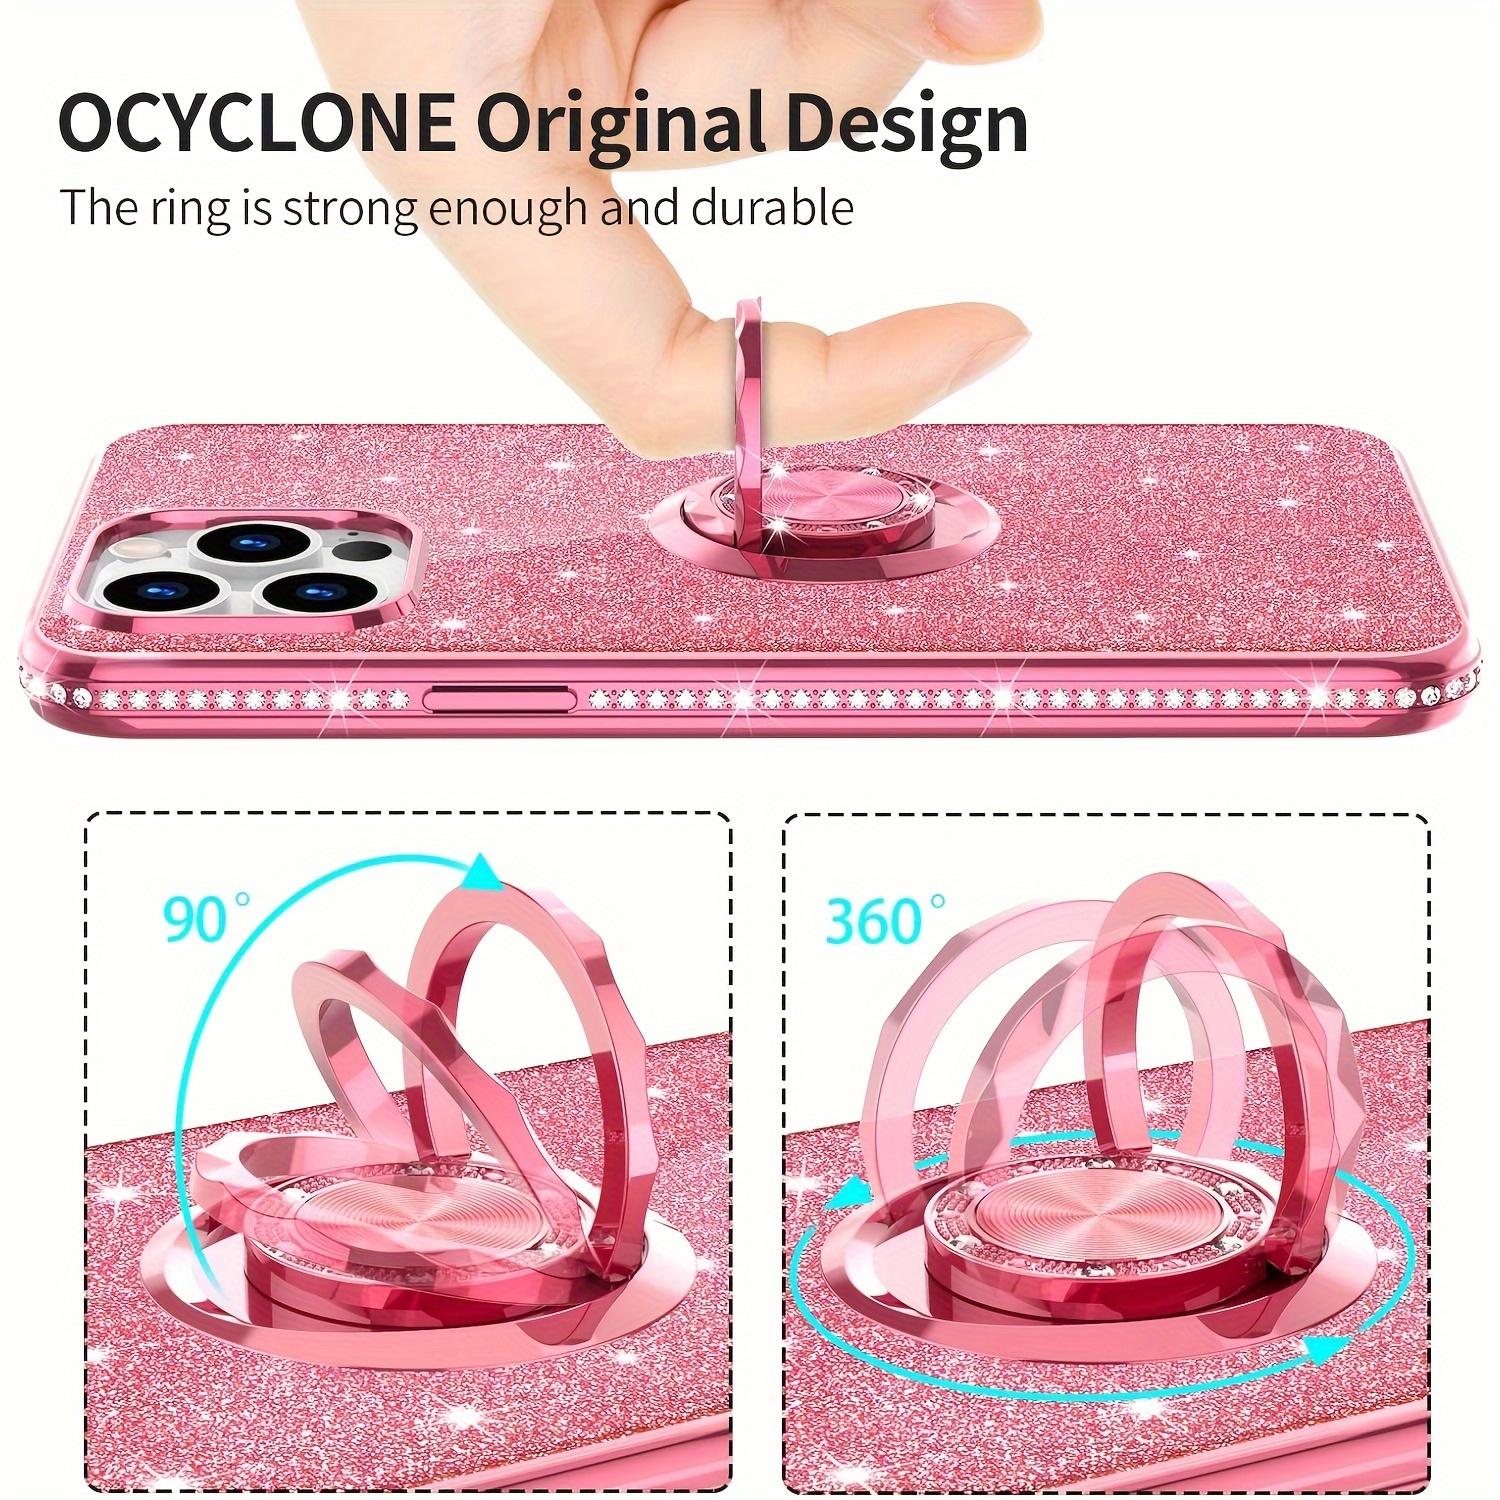 Glitter Cute Phone Case Girls Kickstand for Apple iPhone 11 Pro Max Case,Bling  Diamond Rhinestone Bumper Ring Stand Thin Soft Sparkly Case for iPhone 11  Pro Max - Rose Gold 